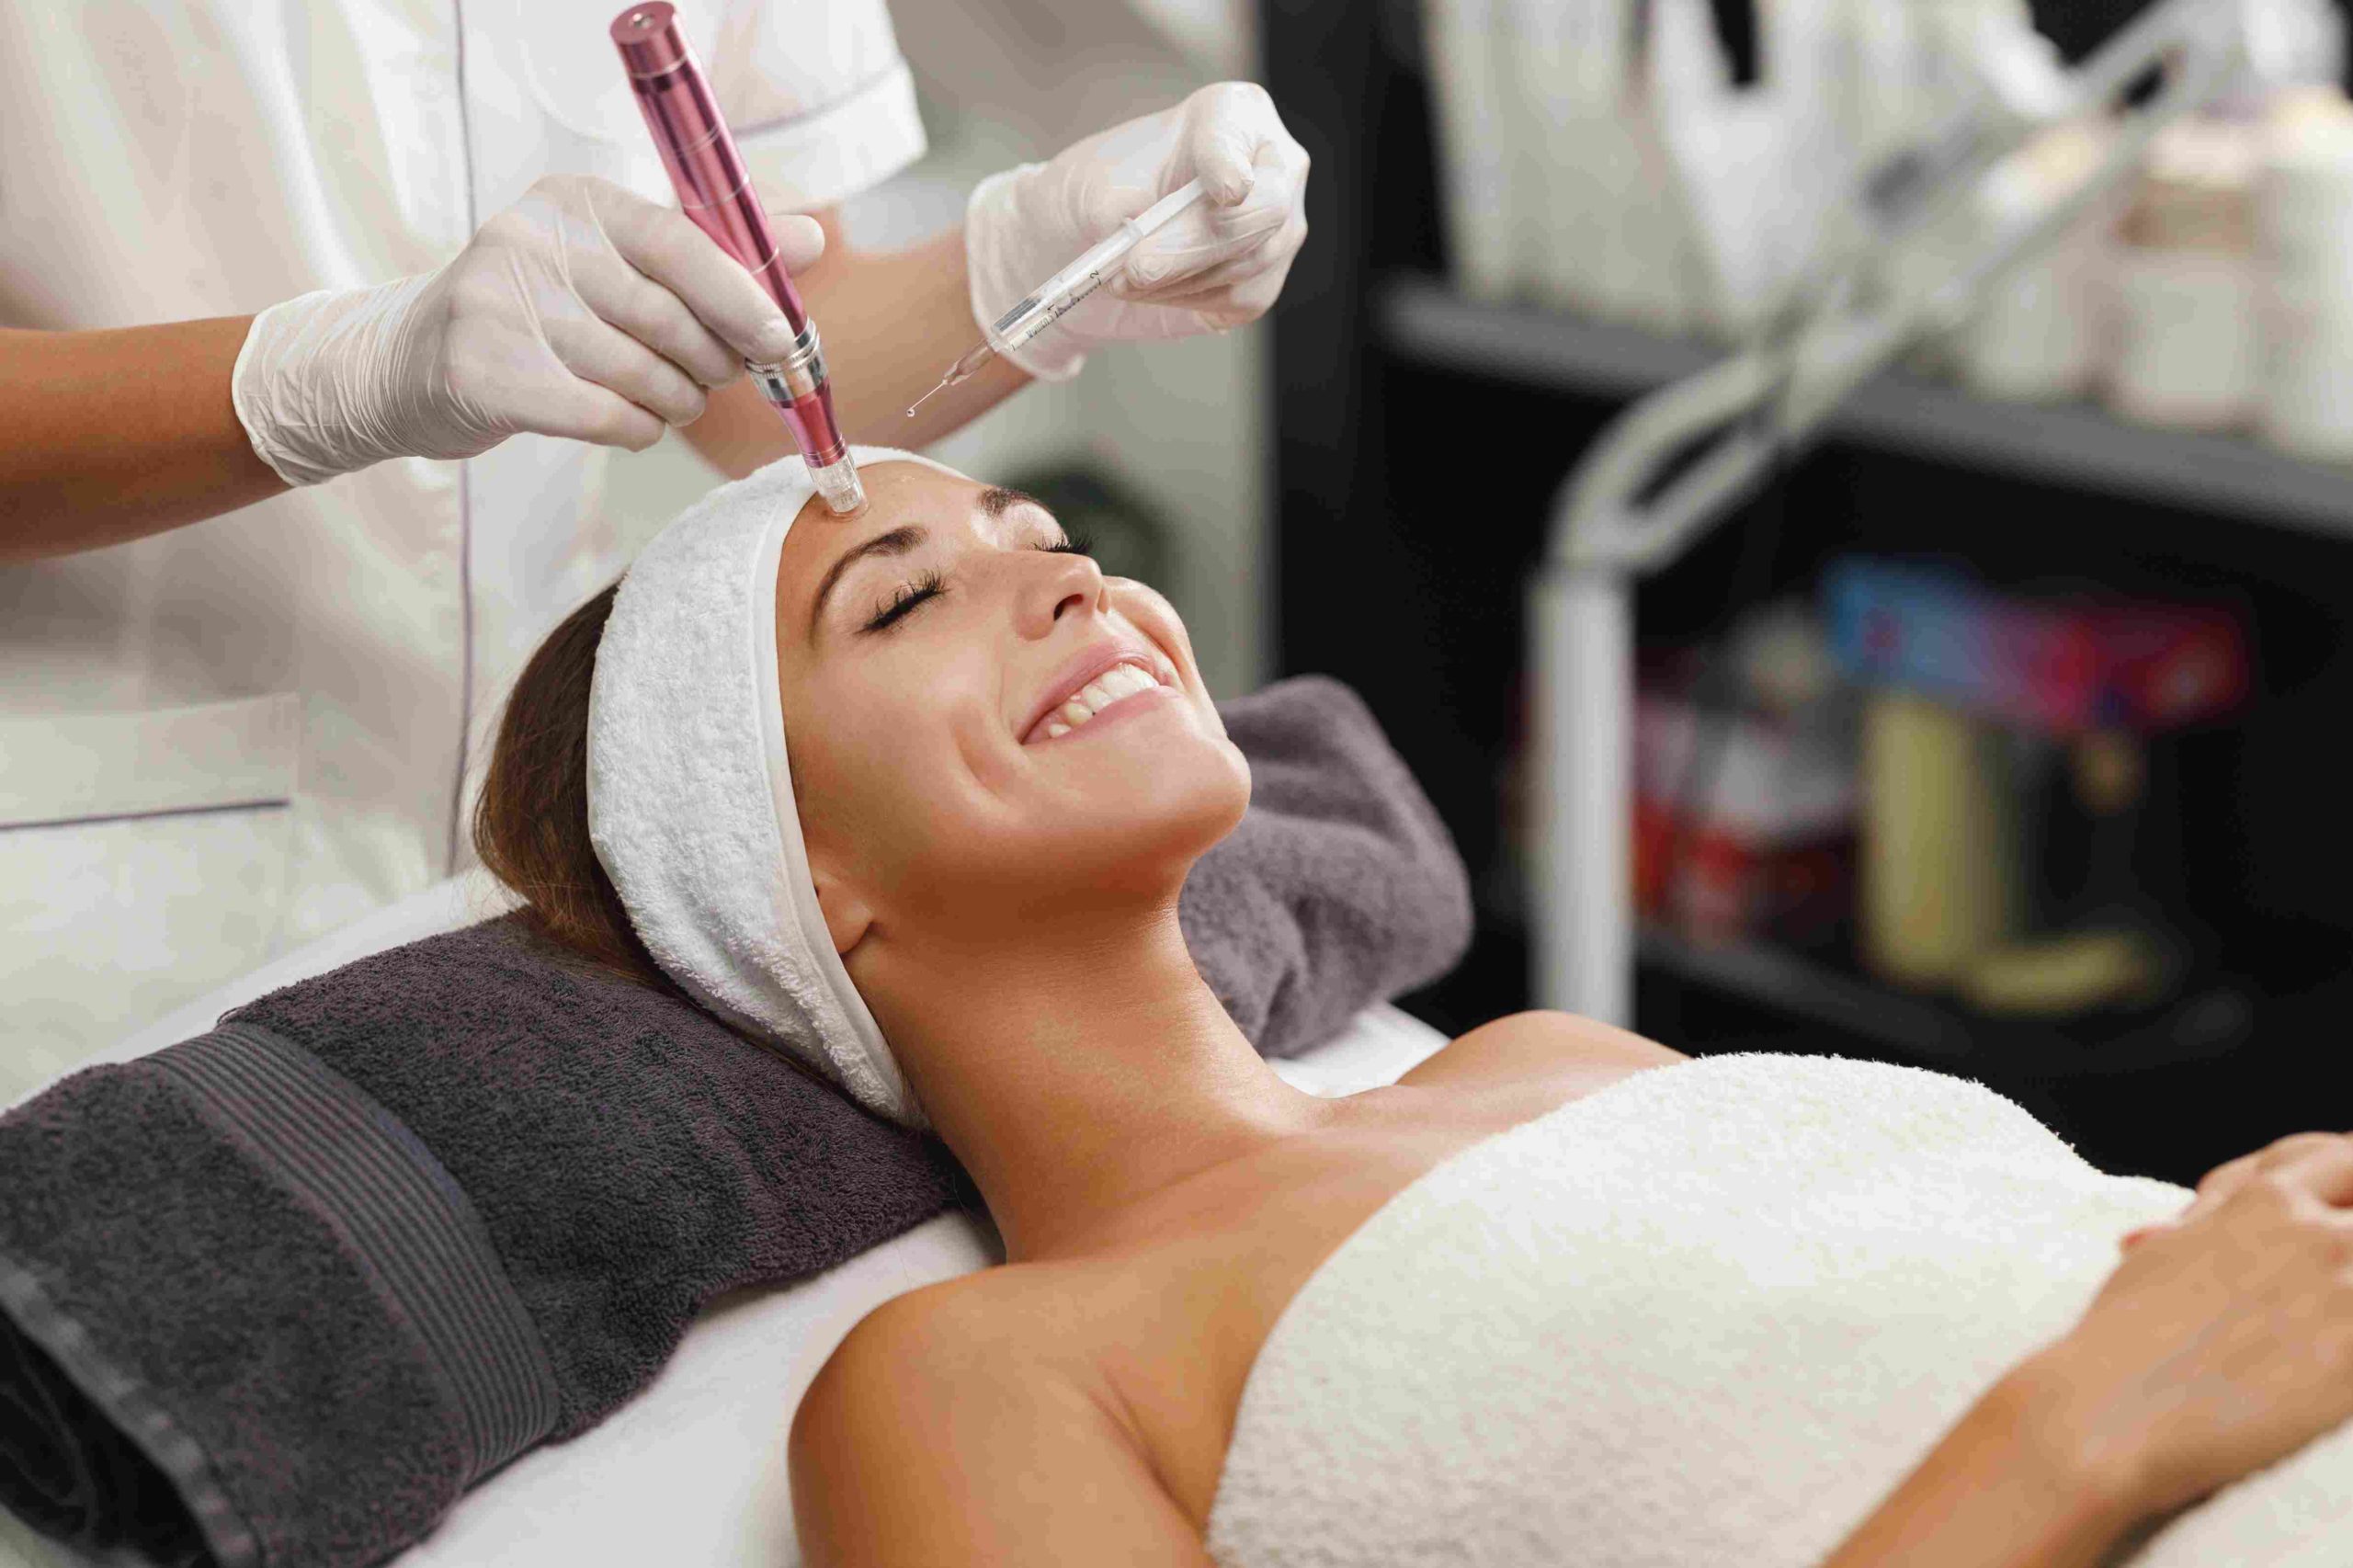 Lying Dimpled Smiling Woman Getting RF Microneedling Treatment | Avail Aesthetics in Wake Forest, NC